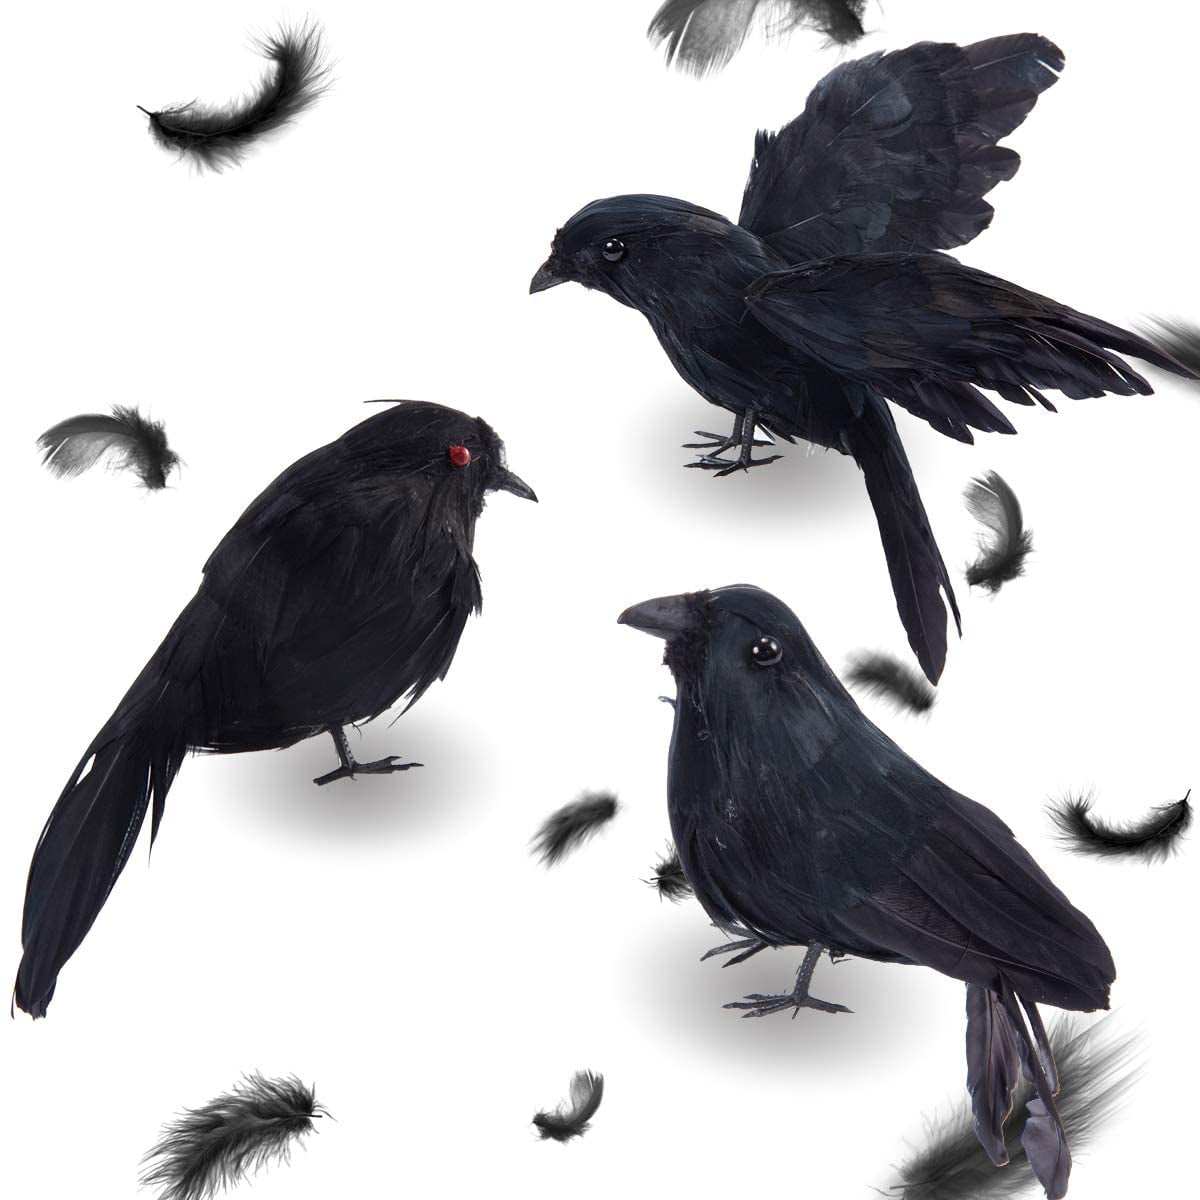 Halloween Crows And Ravens Decor Realistic Handmade Decorations Fake Crows Ravens Prop 3 Pack Black Crows Halloween Decor Feathered Crow Fly And Stand Ravens for Outdoors And Indoors Crow Decoration 